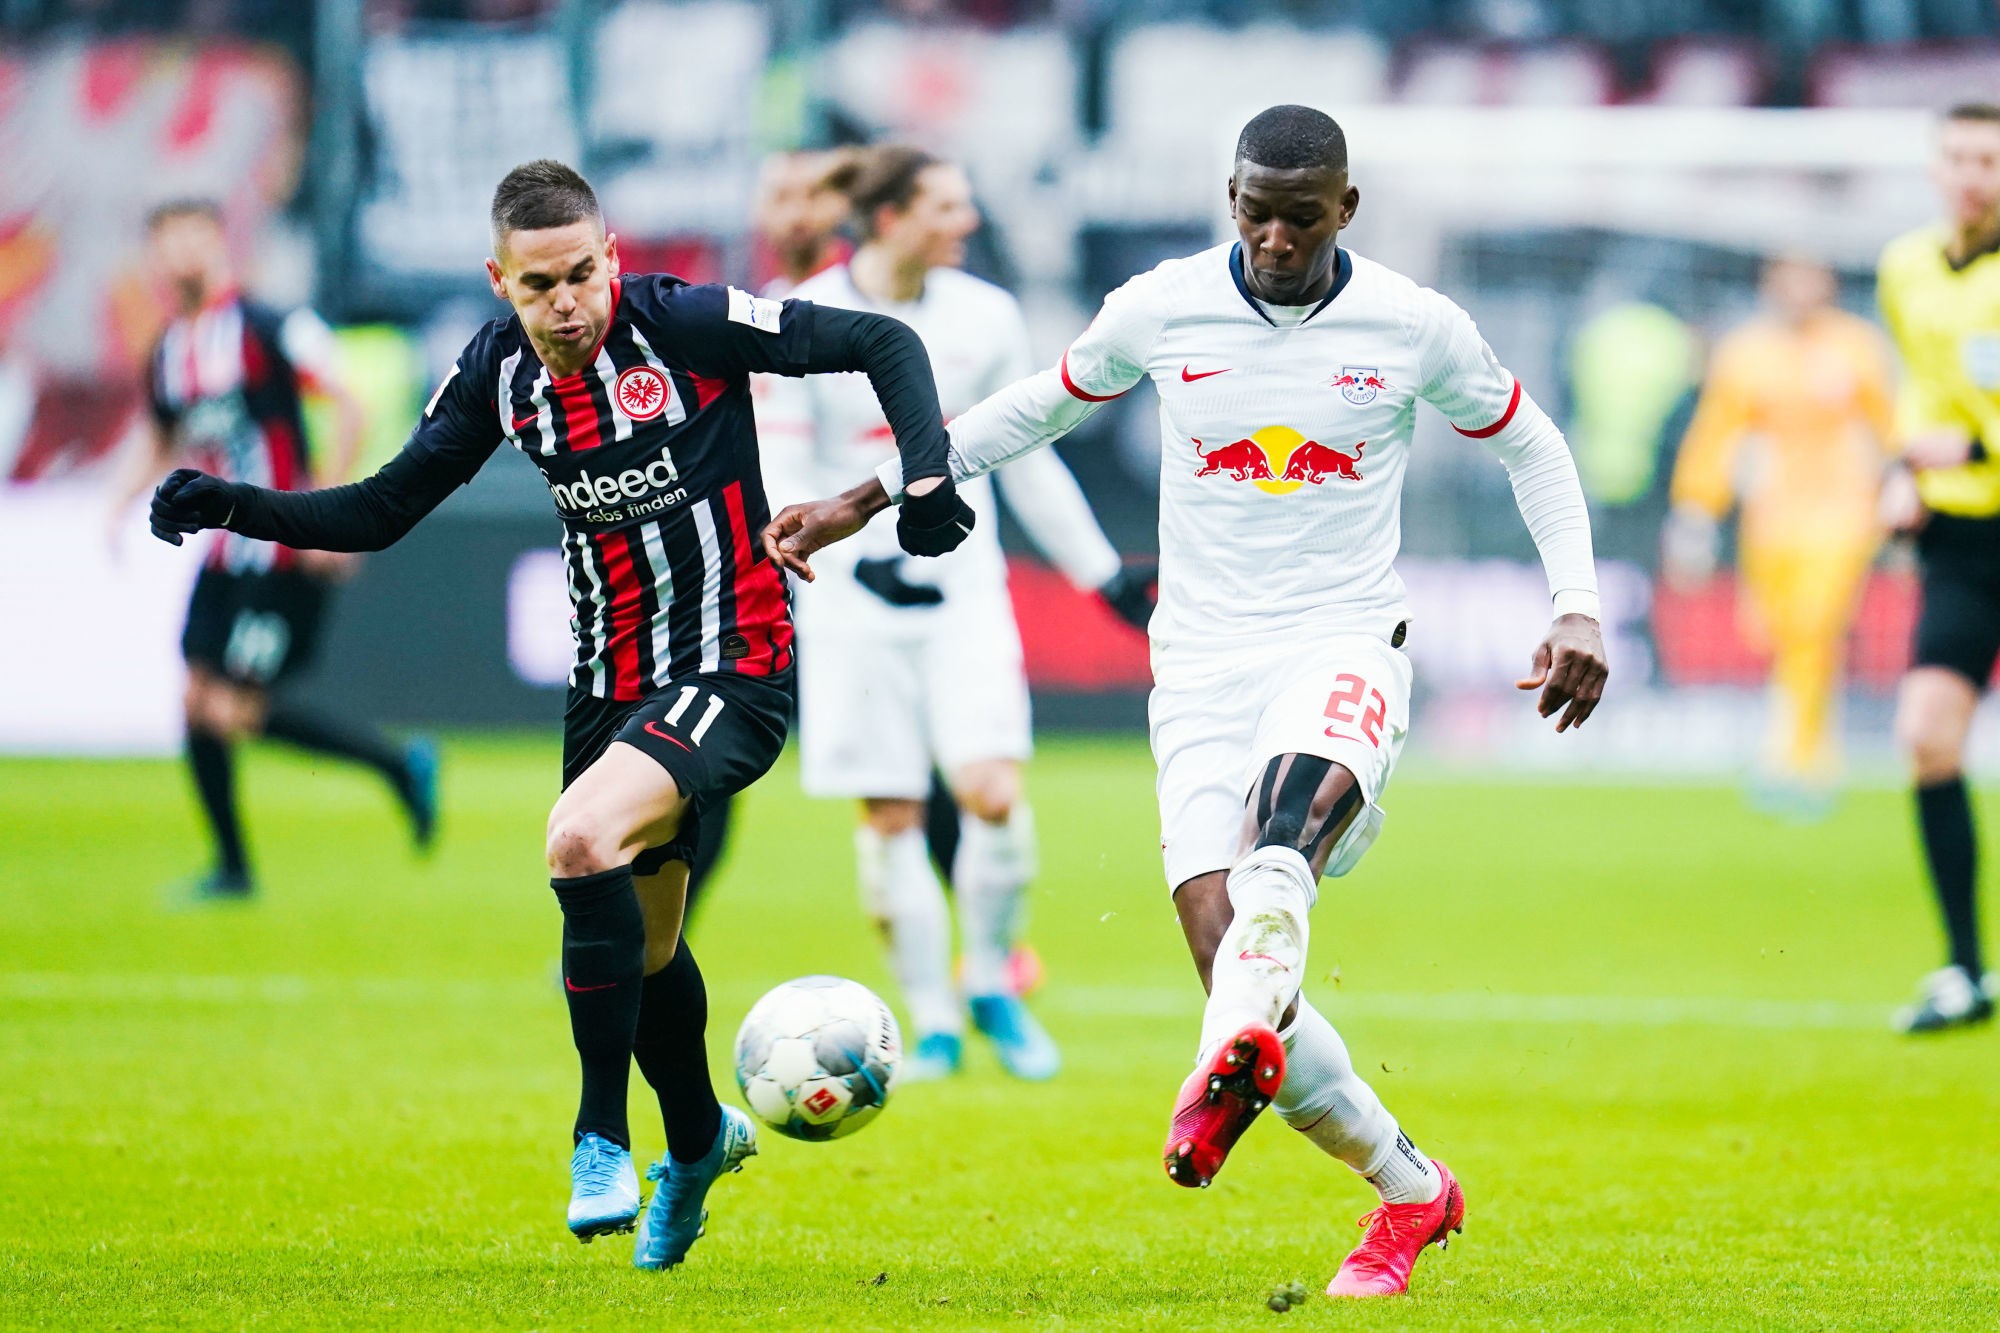 25 January 2020, Hessen, Frankfurt/Main: Football: Bundesliga, 19th matchday, Eintracht Frankfurt - RB Leipzig, Commerzbank Arena. Frankfurt's Mijat Gacinovic (l) and Leipzig's Nordi Mukiele fight for the ball. Photo: Uwe Anspach/dpa - IMPORTANT NOTE: In accordance with the regulations of the DFL Deutsche Fu?ball Liga and the DFB Deutscher Fu?ball-Bund, it is prohibited to exploit or have exploited in the stadium and/or from the game taken photographs in the form of sequence images and/or video-like photo series. 

Photo by Icon Sport - Nordi MUKIELE - Mijat GACINOVIC - Commerzbank-Arena - Francfort (Allemagne)